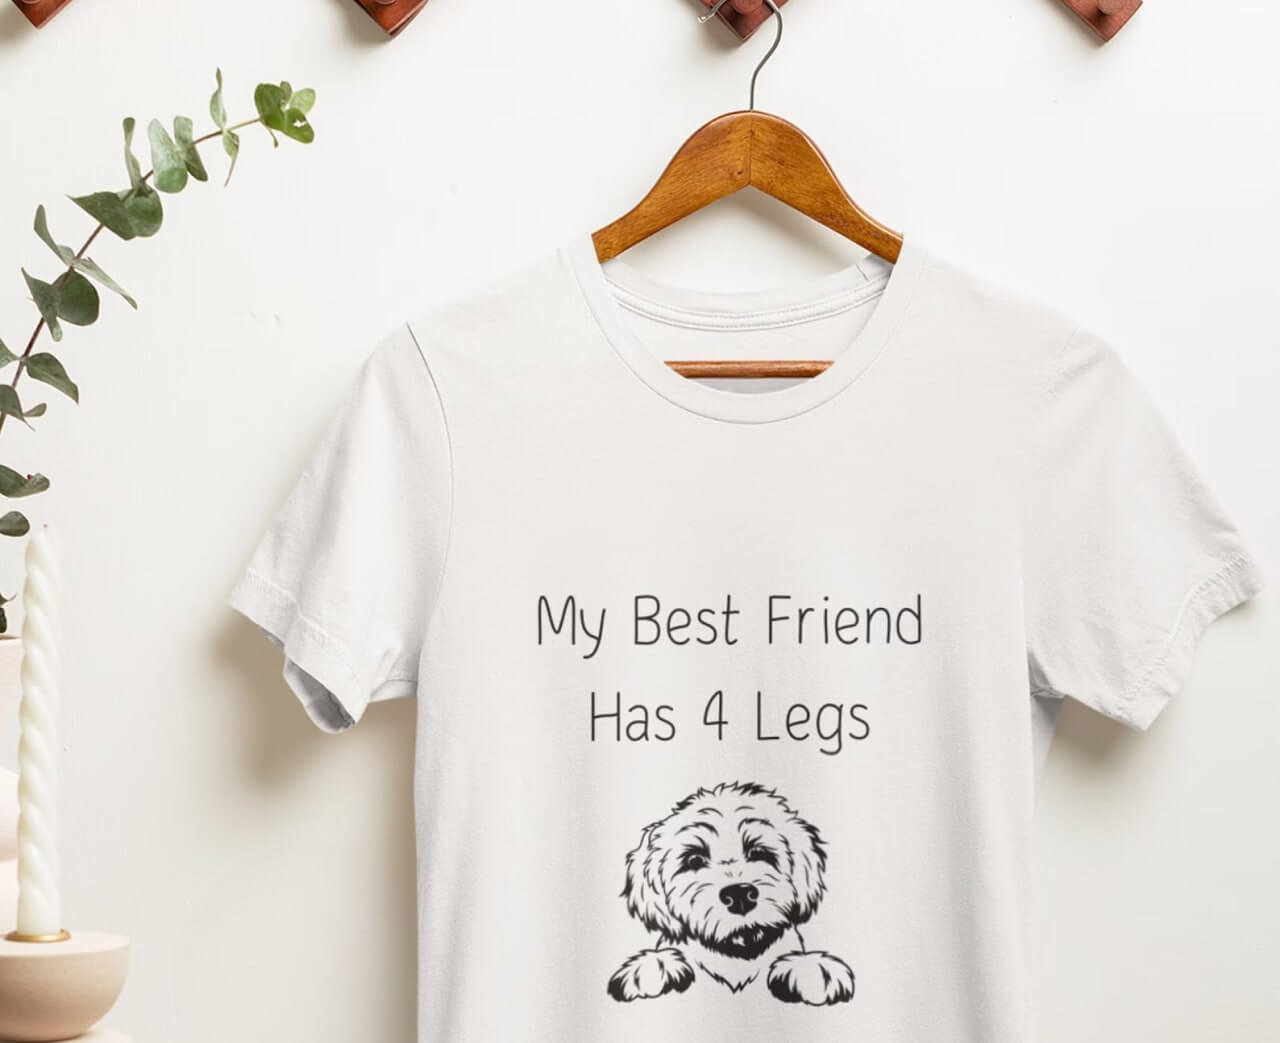 50 Friend Shirt Ideas to Try in 2023 33